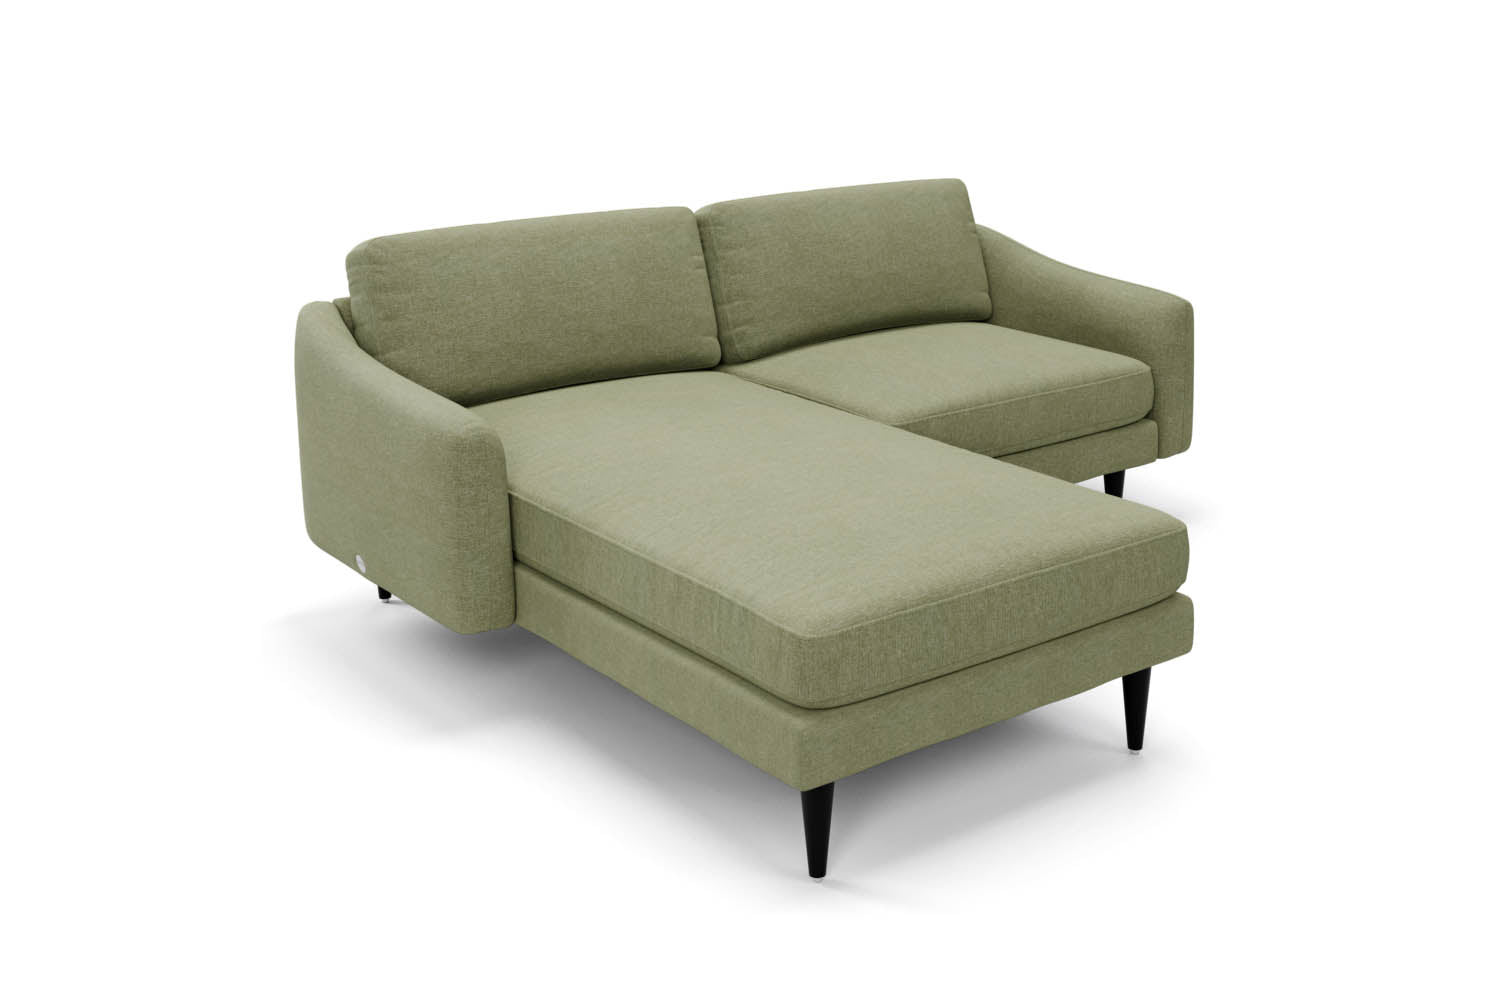 The Rebel - Left Hand Chaise Sofa - Sage